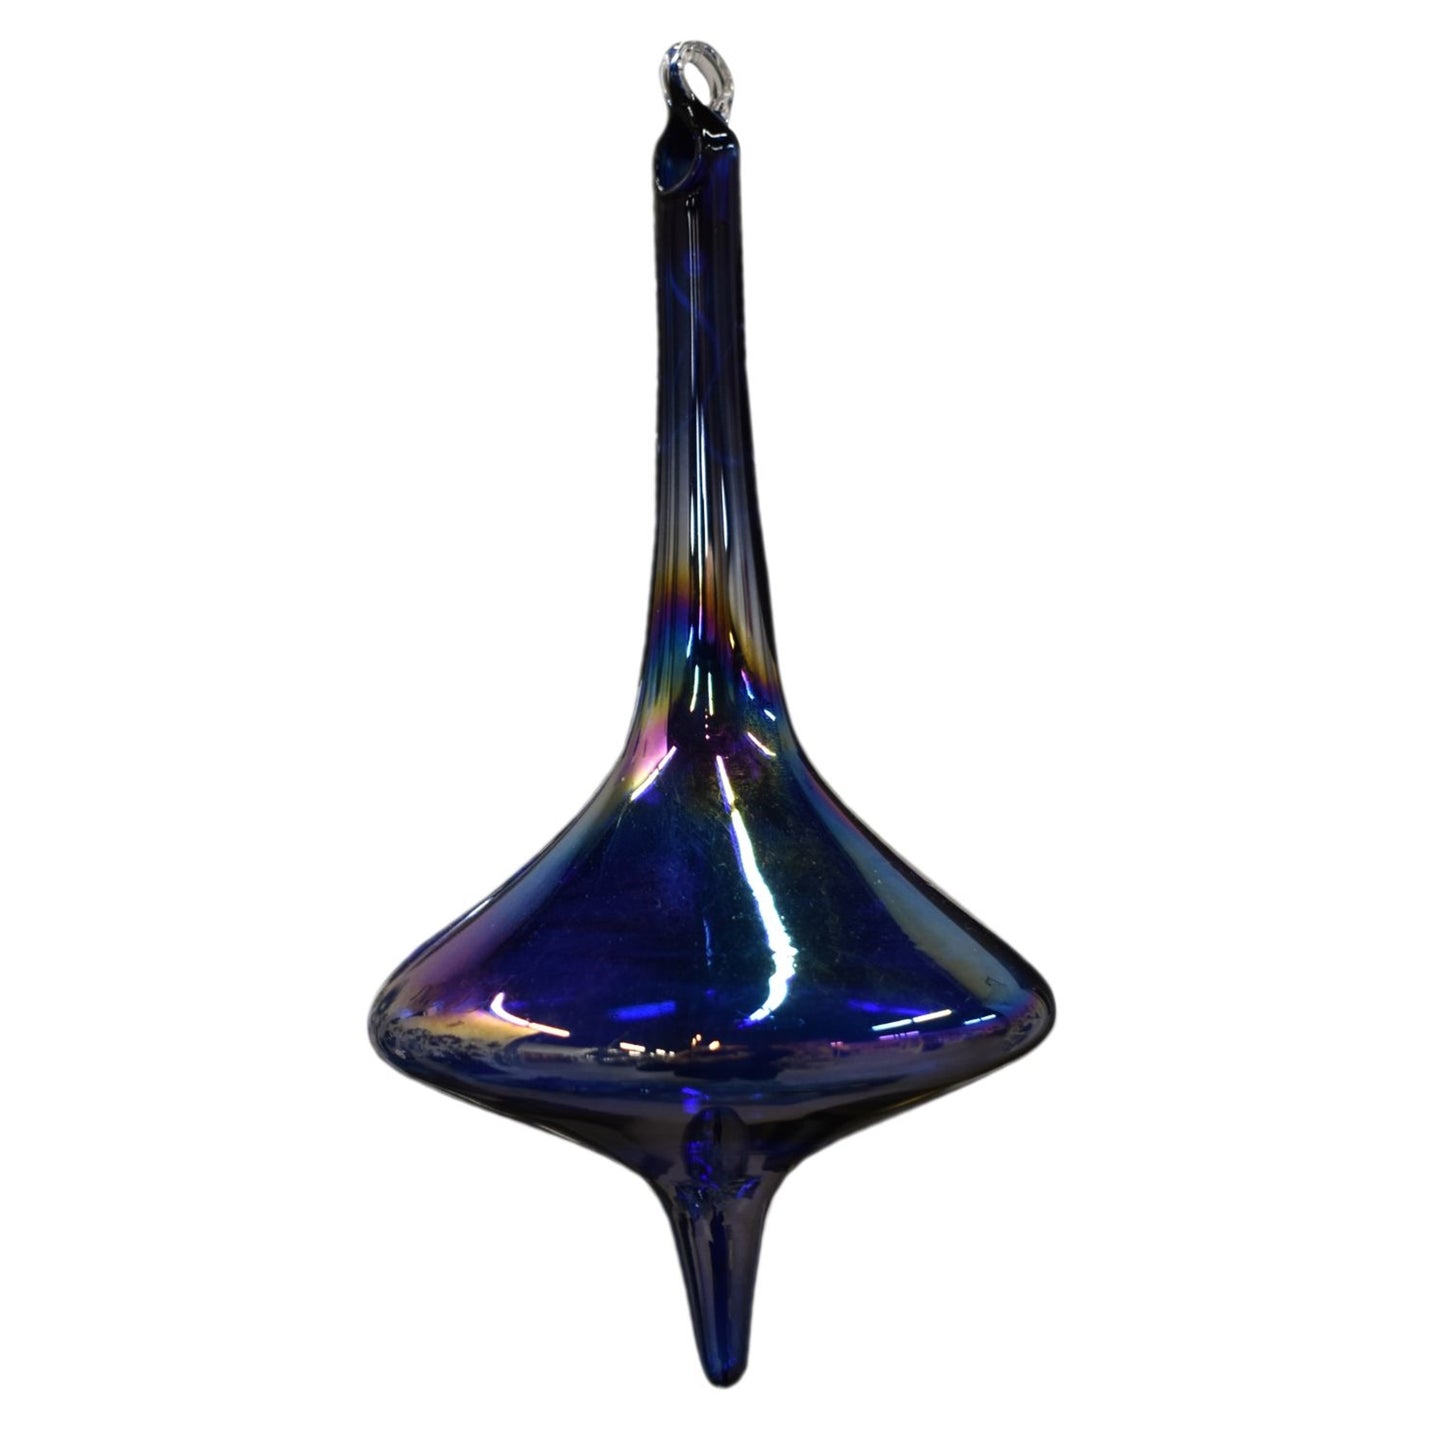 Iridescent Glass Finial Ornament 7" x 3.5" in Blue | LCC22